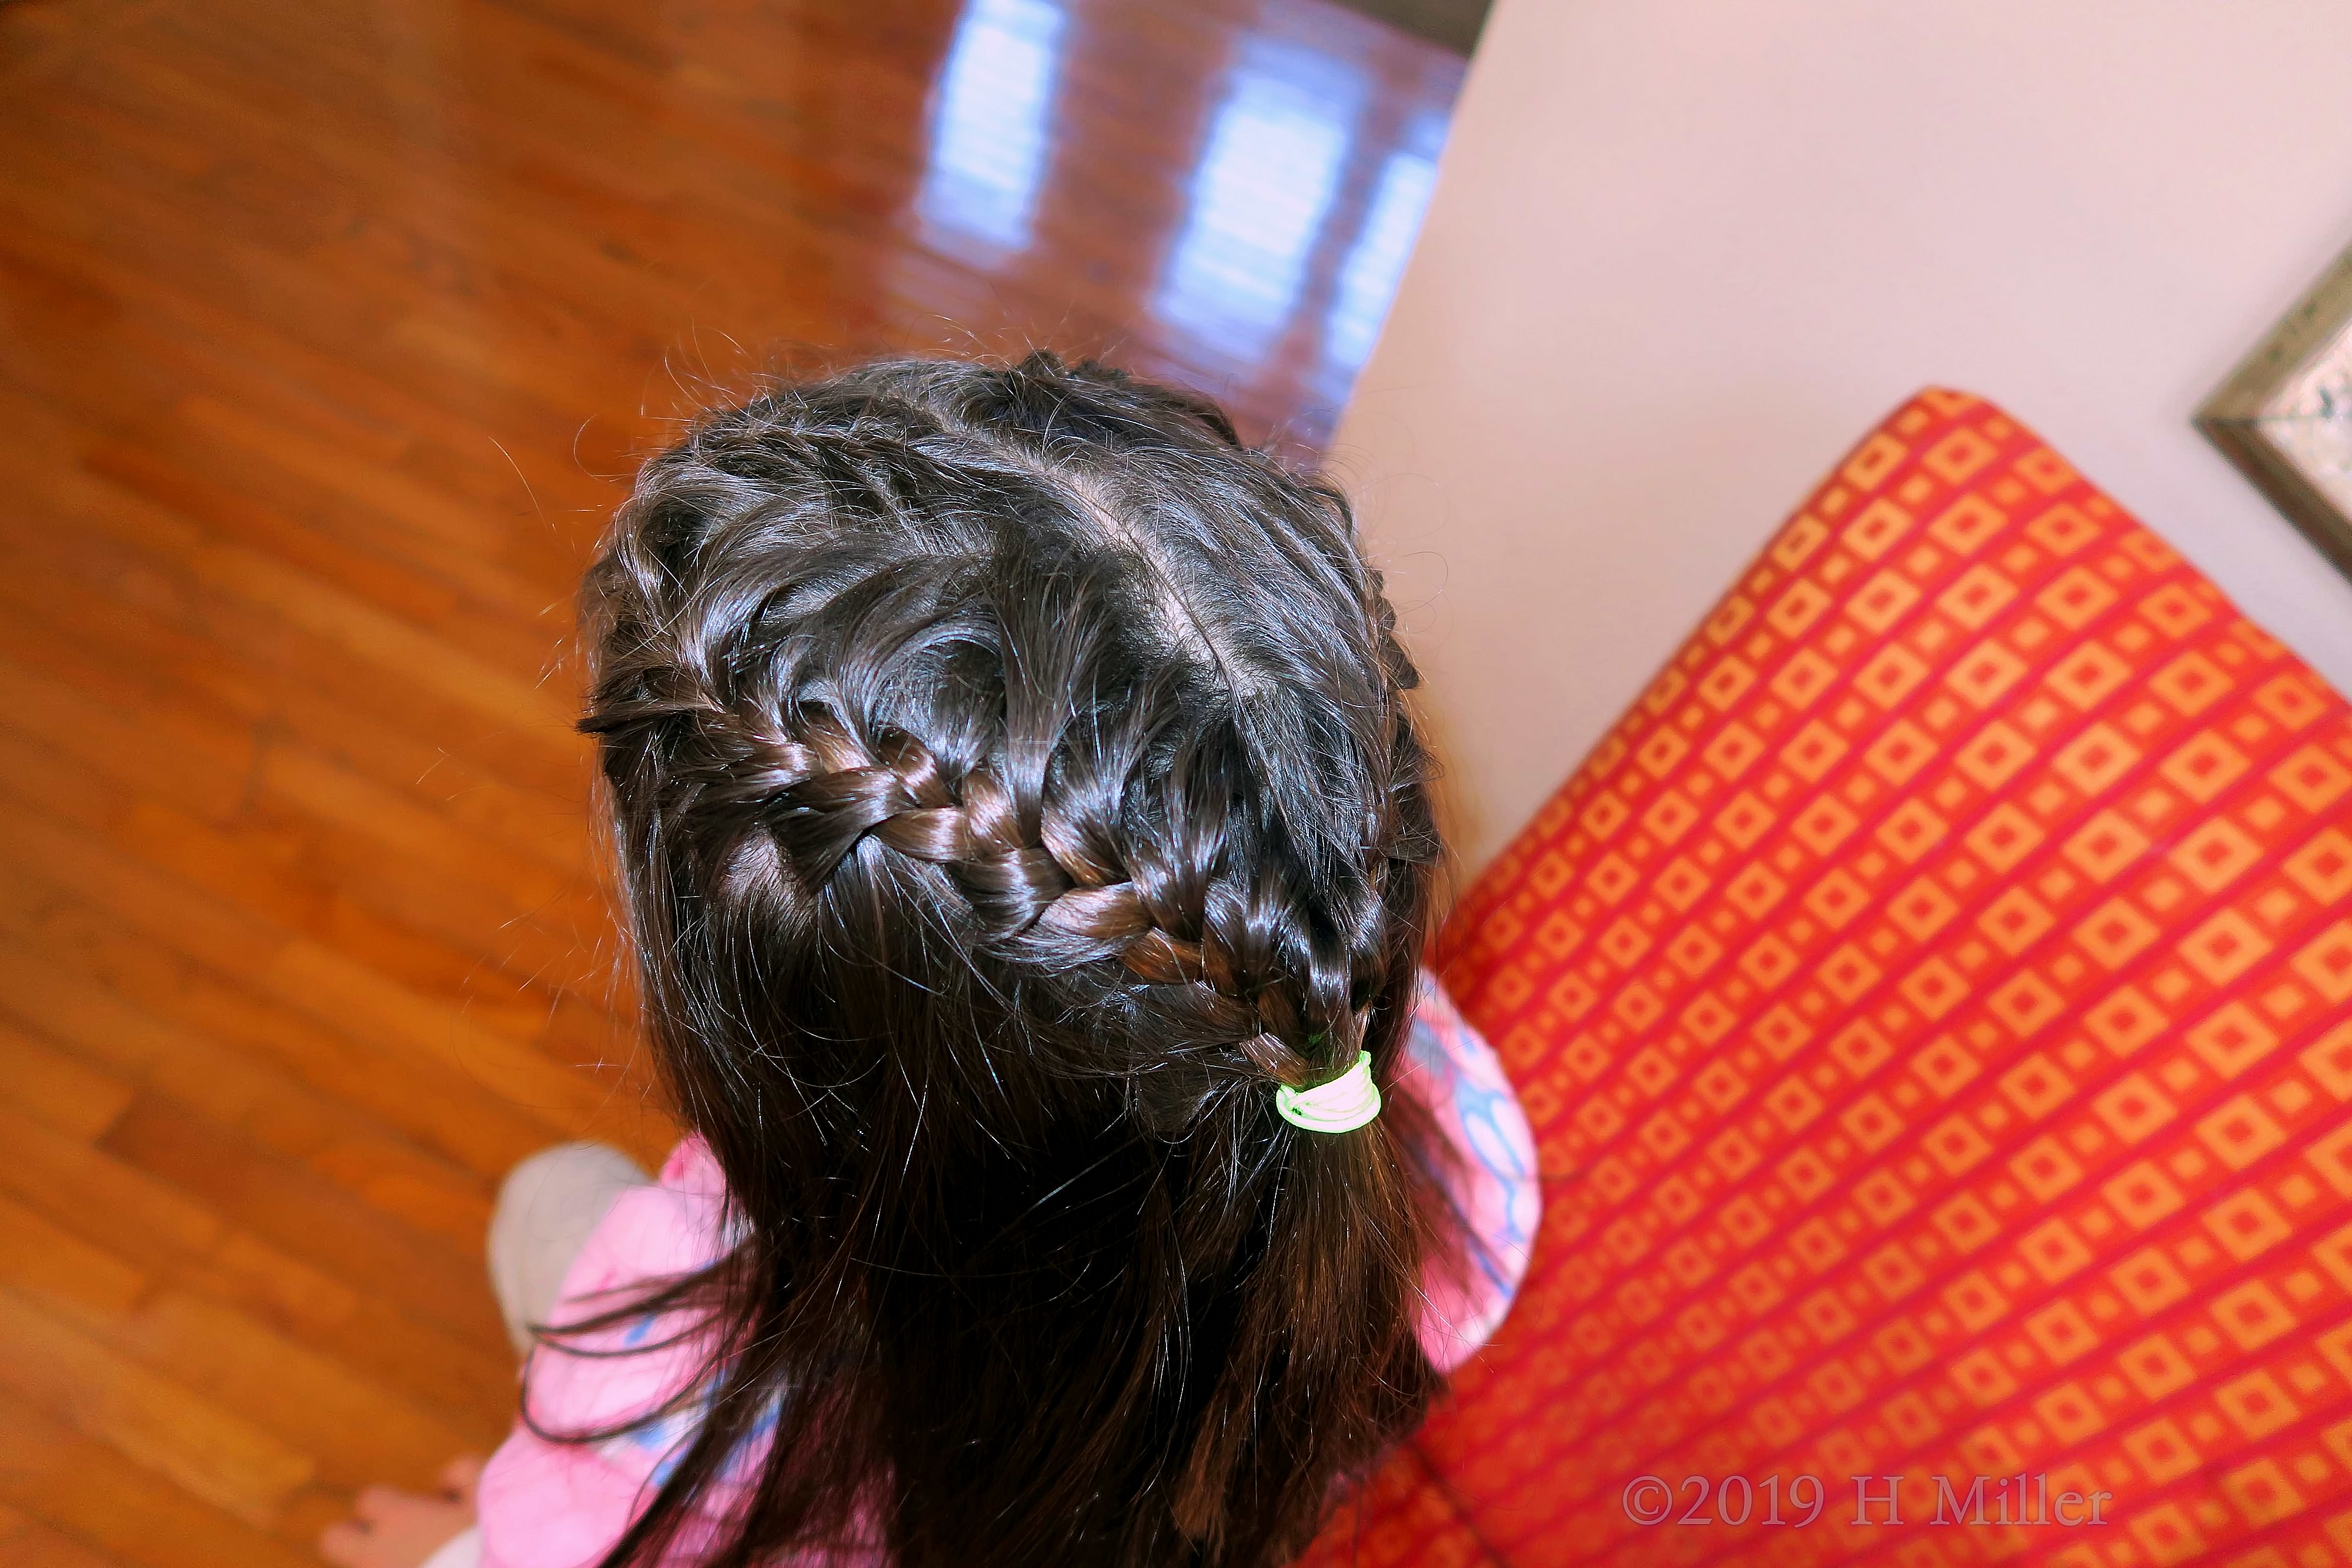 Best Of Both Worlds! Kids Party Guest Has Heart Shaped Braid Girls Hairstyle! 4